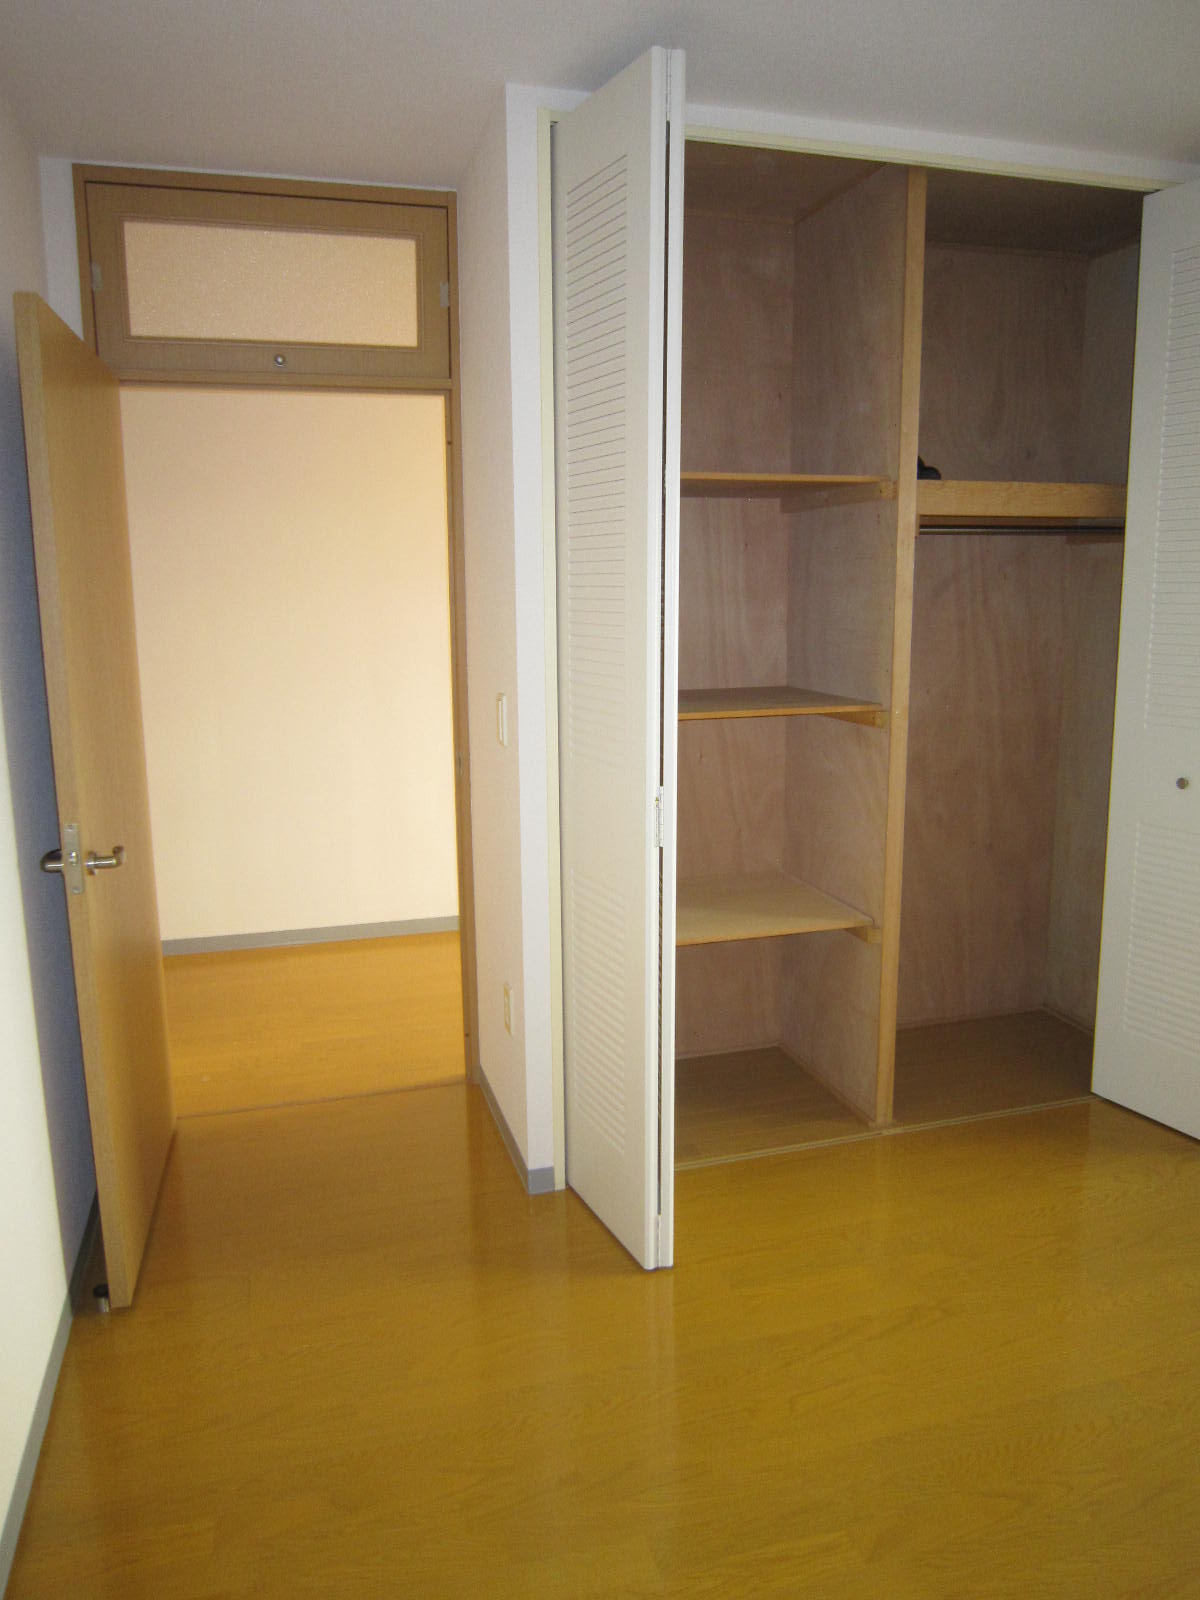 Other room space. From Genkan hall to storage with Western-style